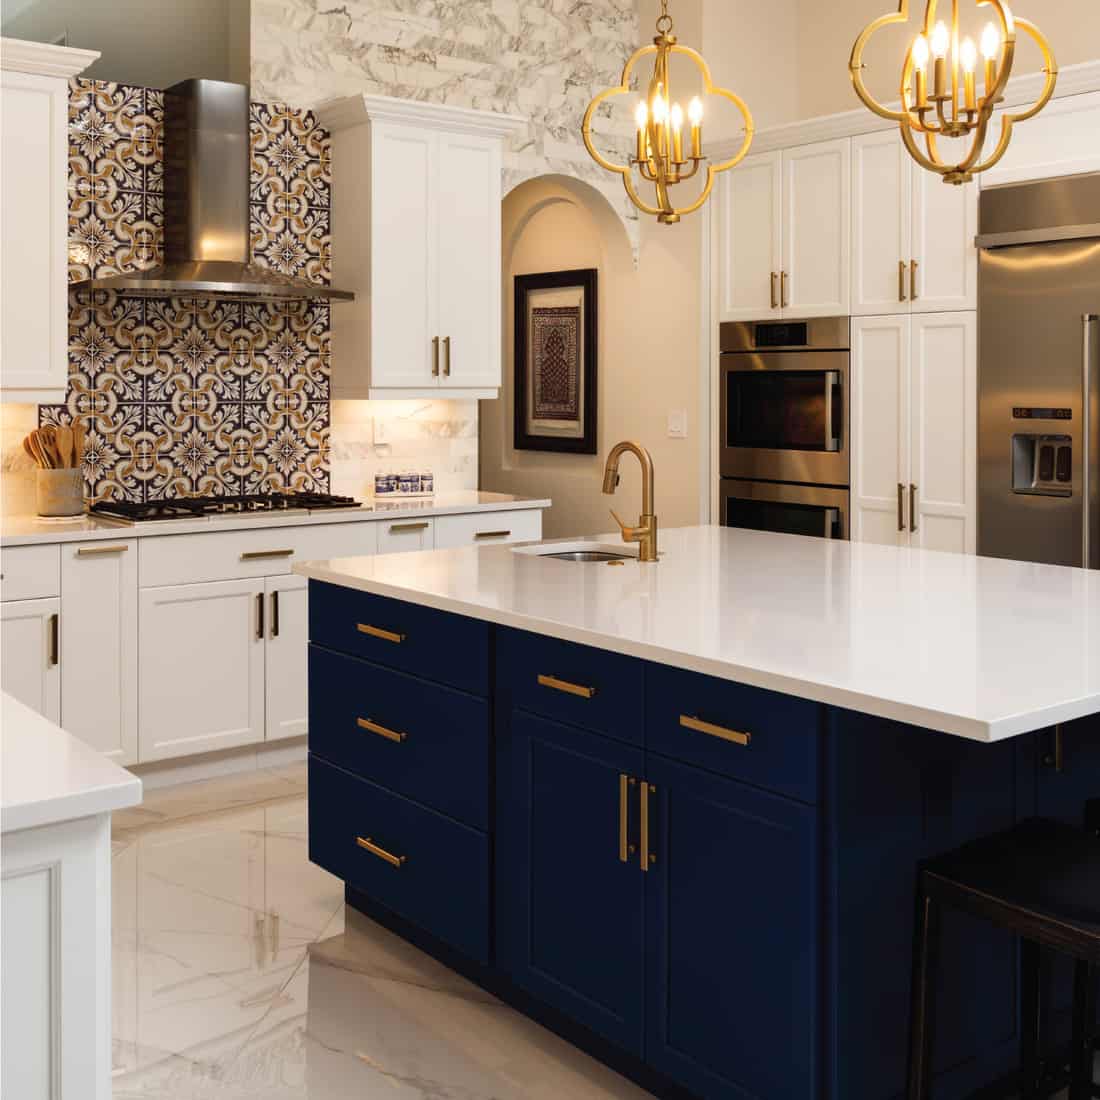 Beautiful luxury estate home kitchen with white cabinets. italian gold accented backsplash